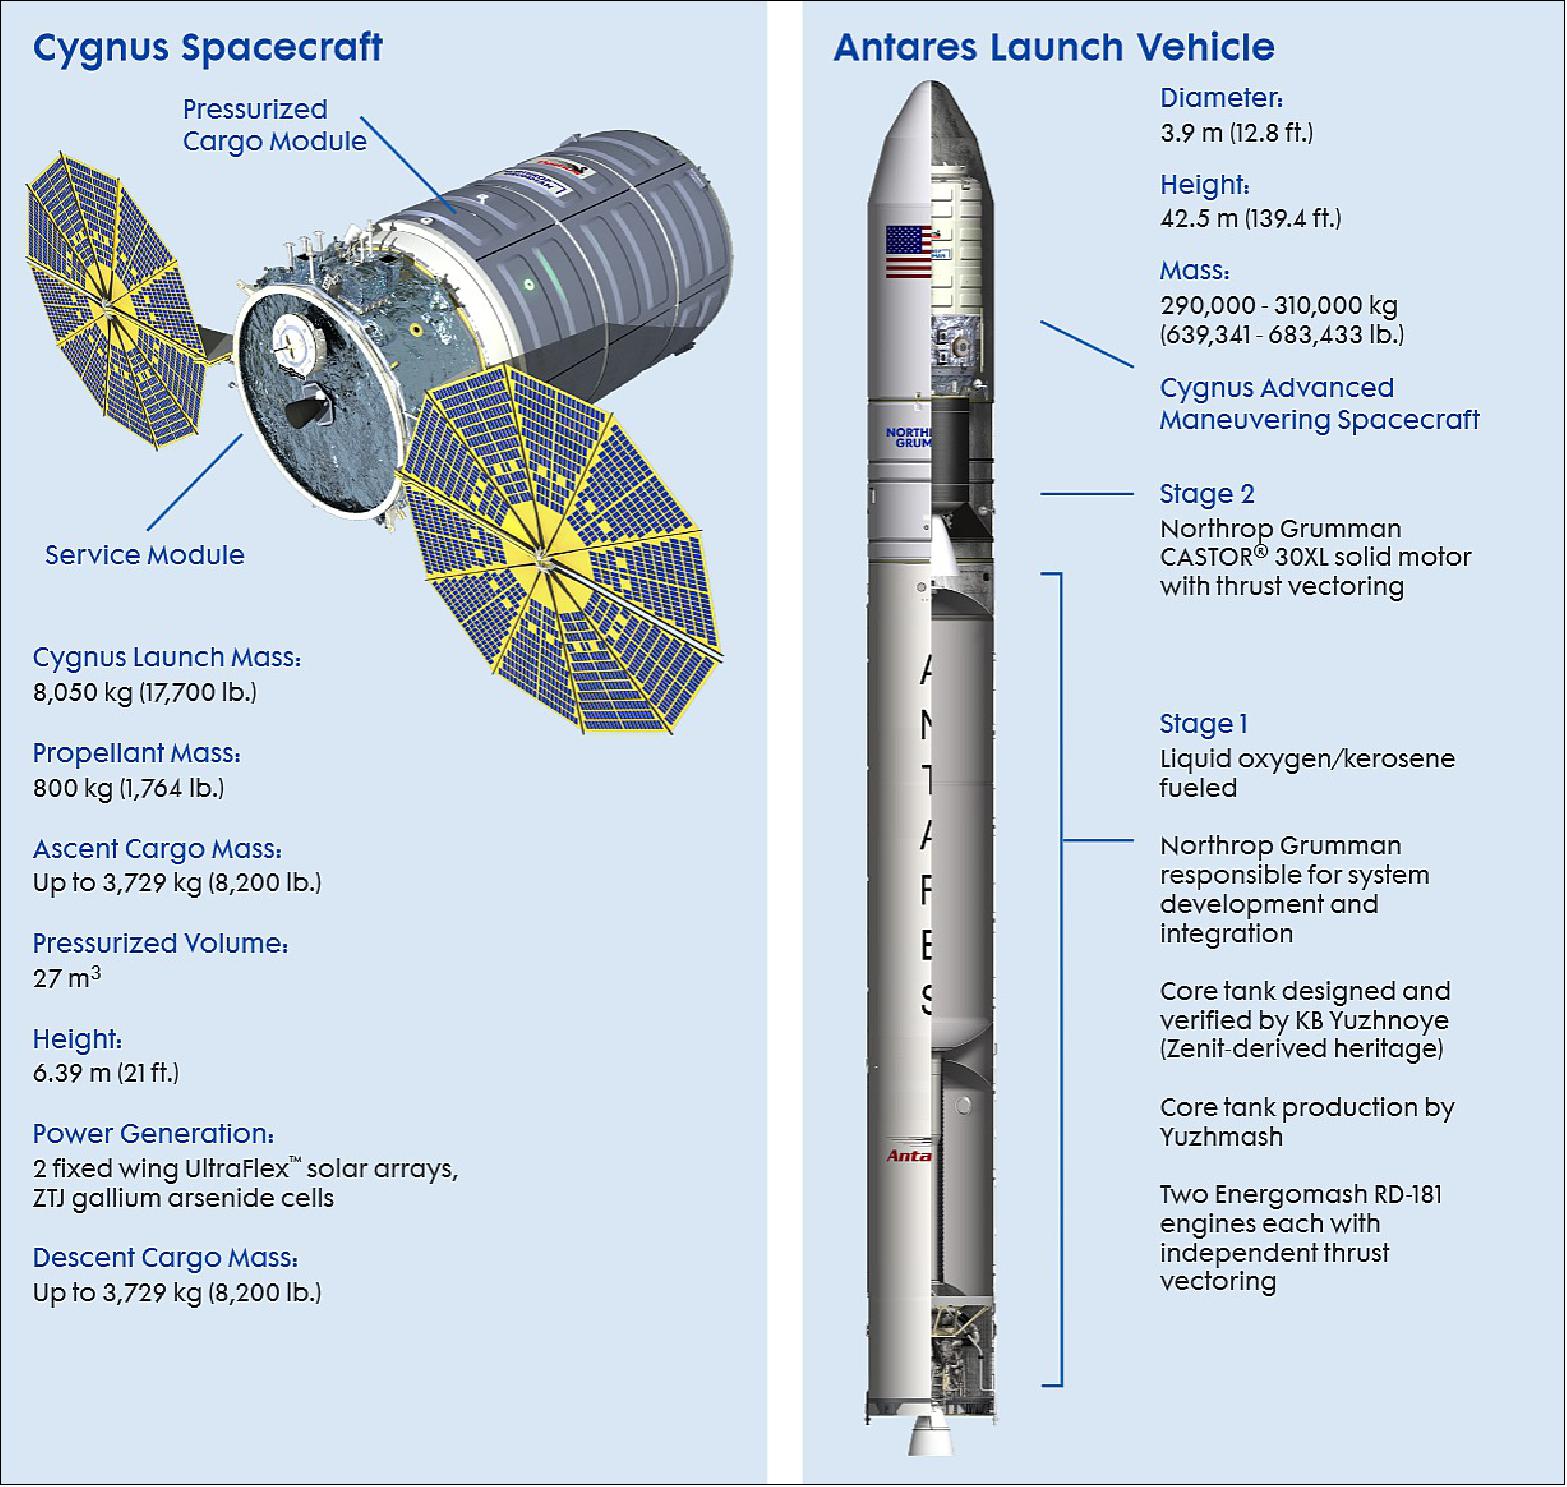 Figure 1: Overview of the Cygnus spacecraft and the Antares launch vehicle (image credit: Northrop Grumman)